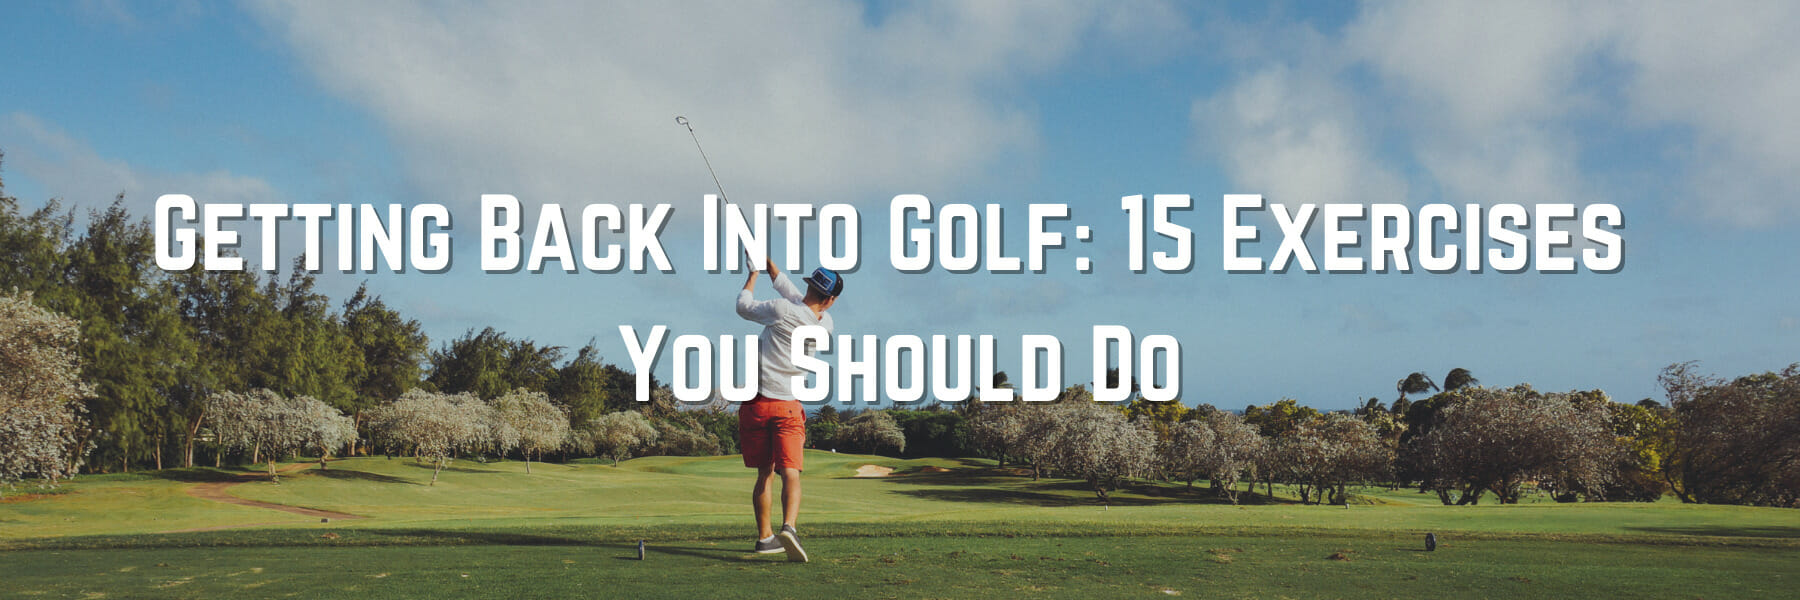 Getting Back Into Golf: 15 Exercises You Should Do